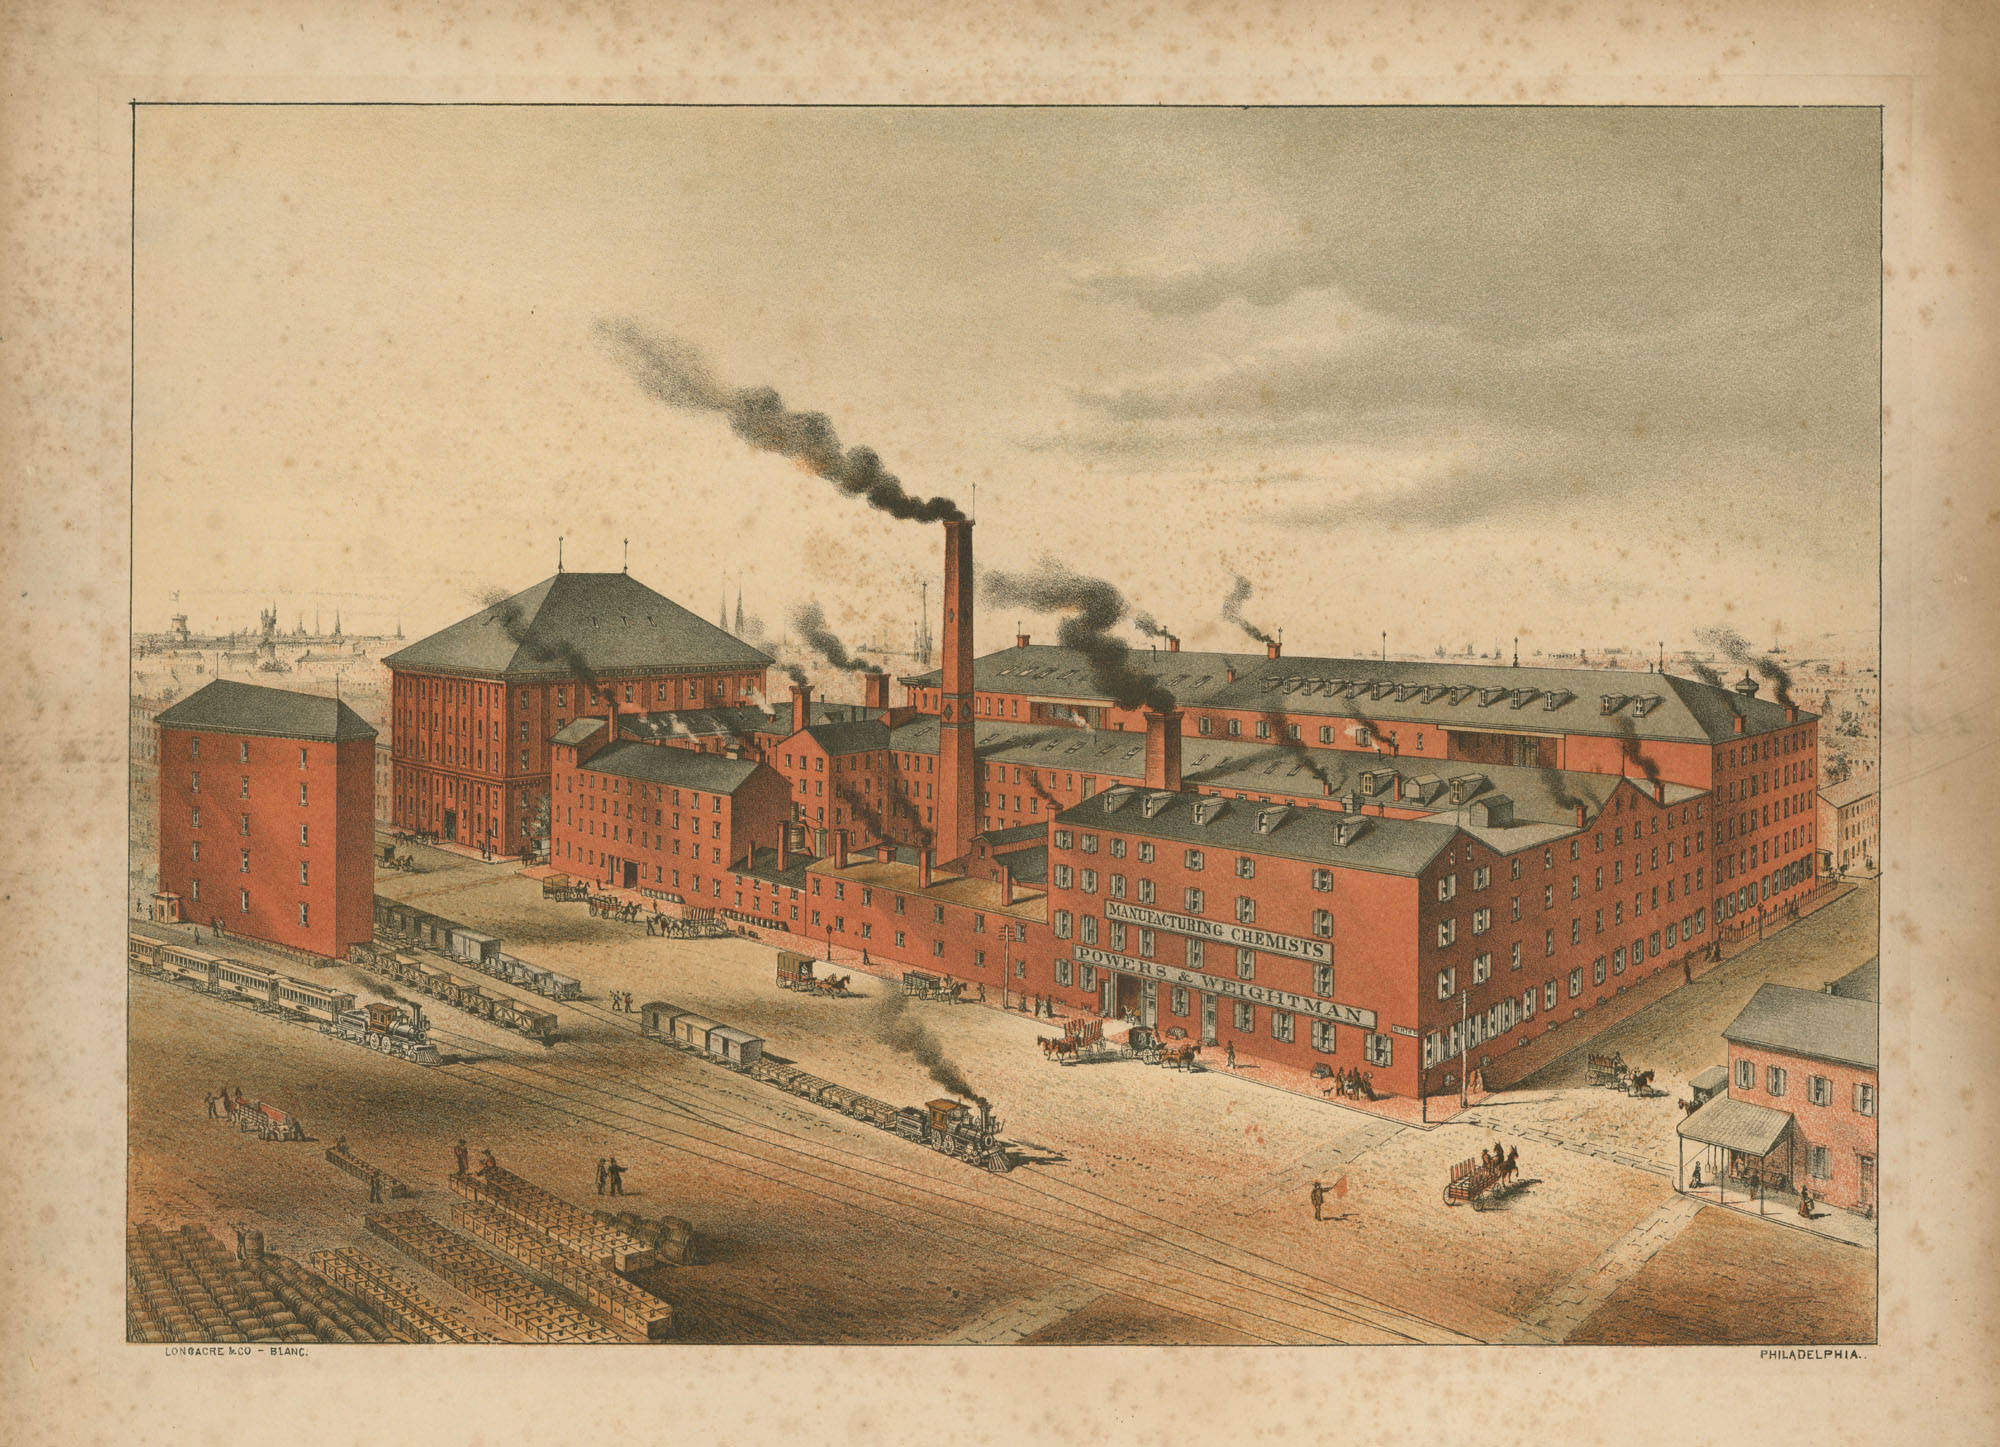 A drawing of a large rectangular brick building. The single building has sections of various floor sized, with black roof slopped at different angles. There are train tracks in the foreground of the building and a train is emitting smoke on the tracks. The factory has three chimneys, which are expelling black smoke. In the background of the image are rough sketches of buildings and churches.